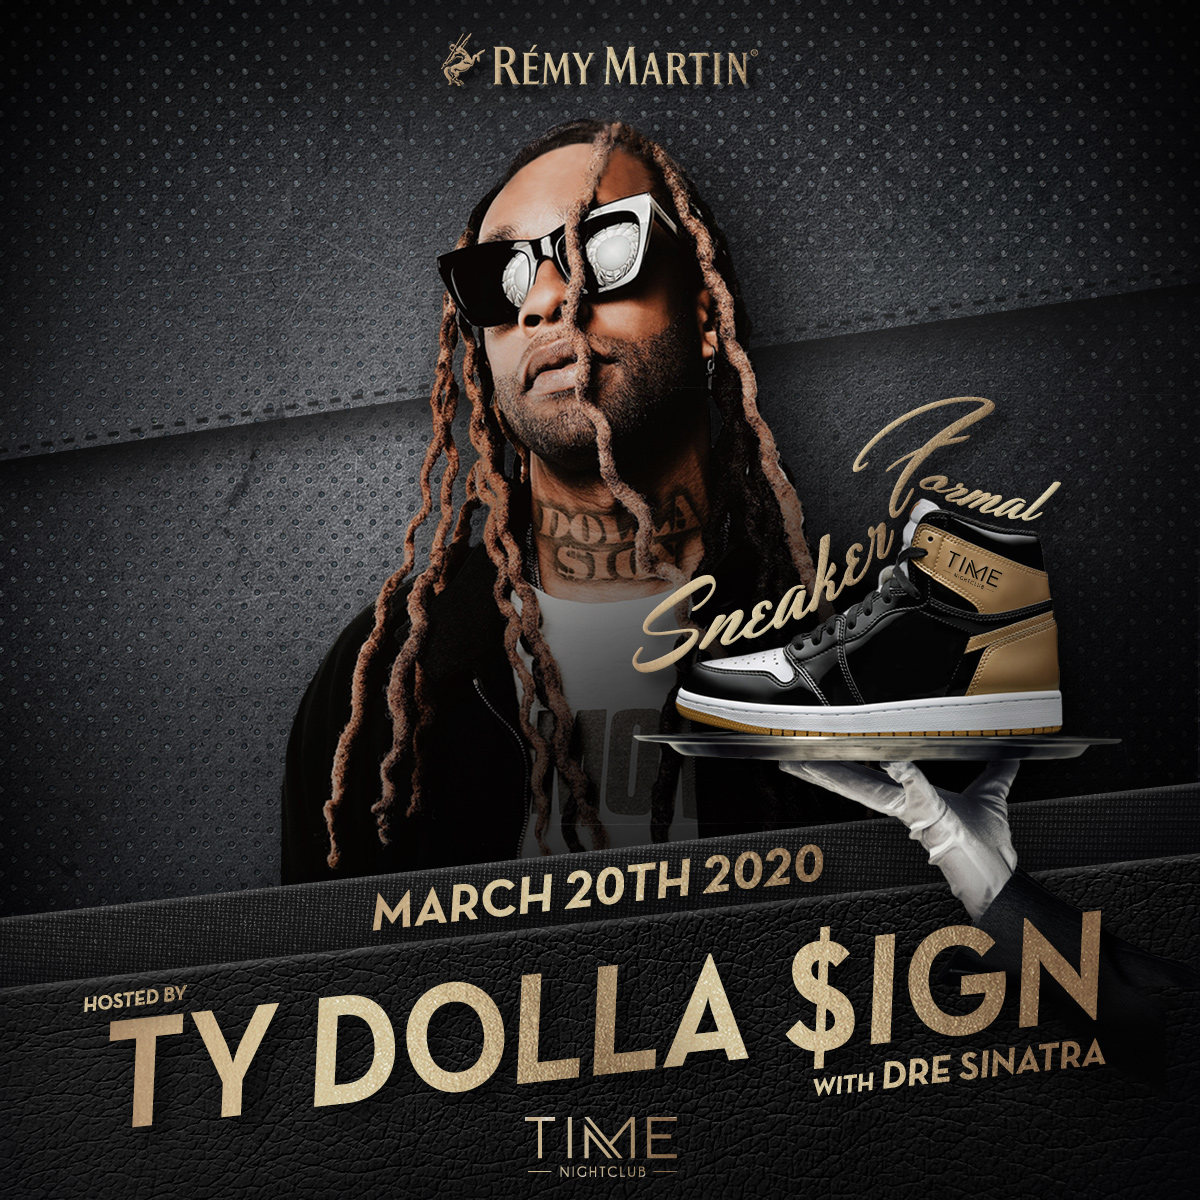 ty dolla ign tickets